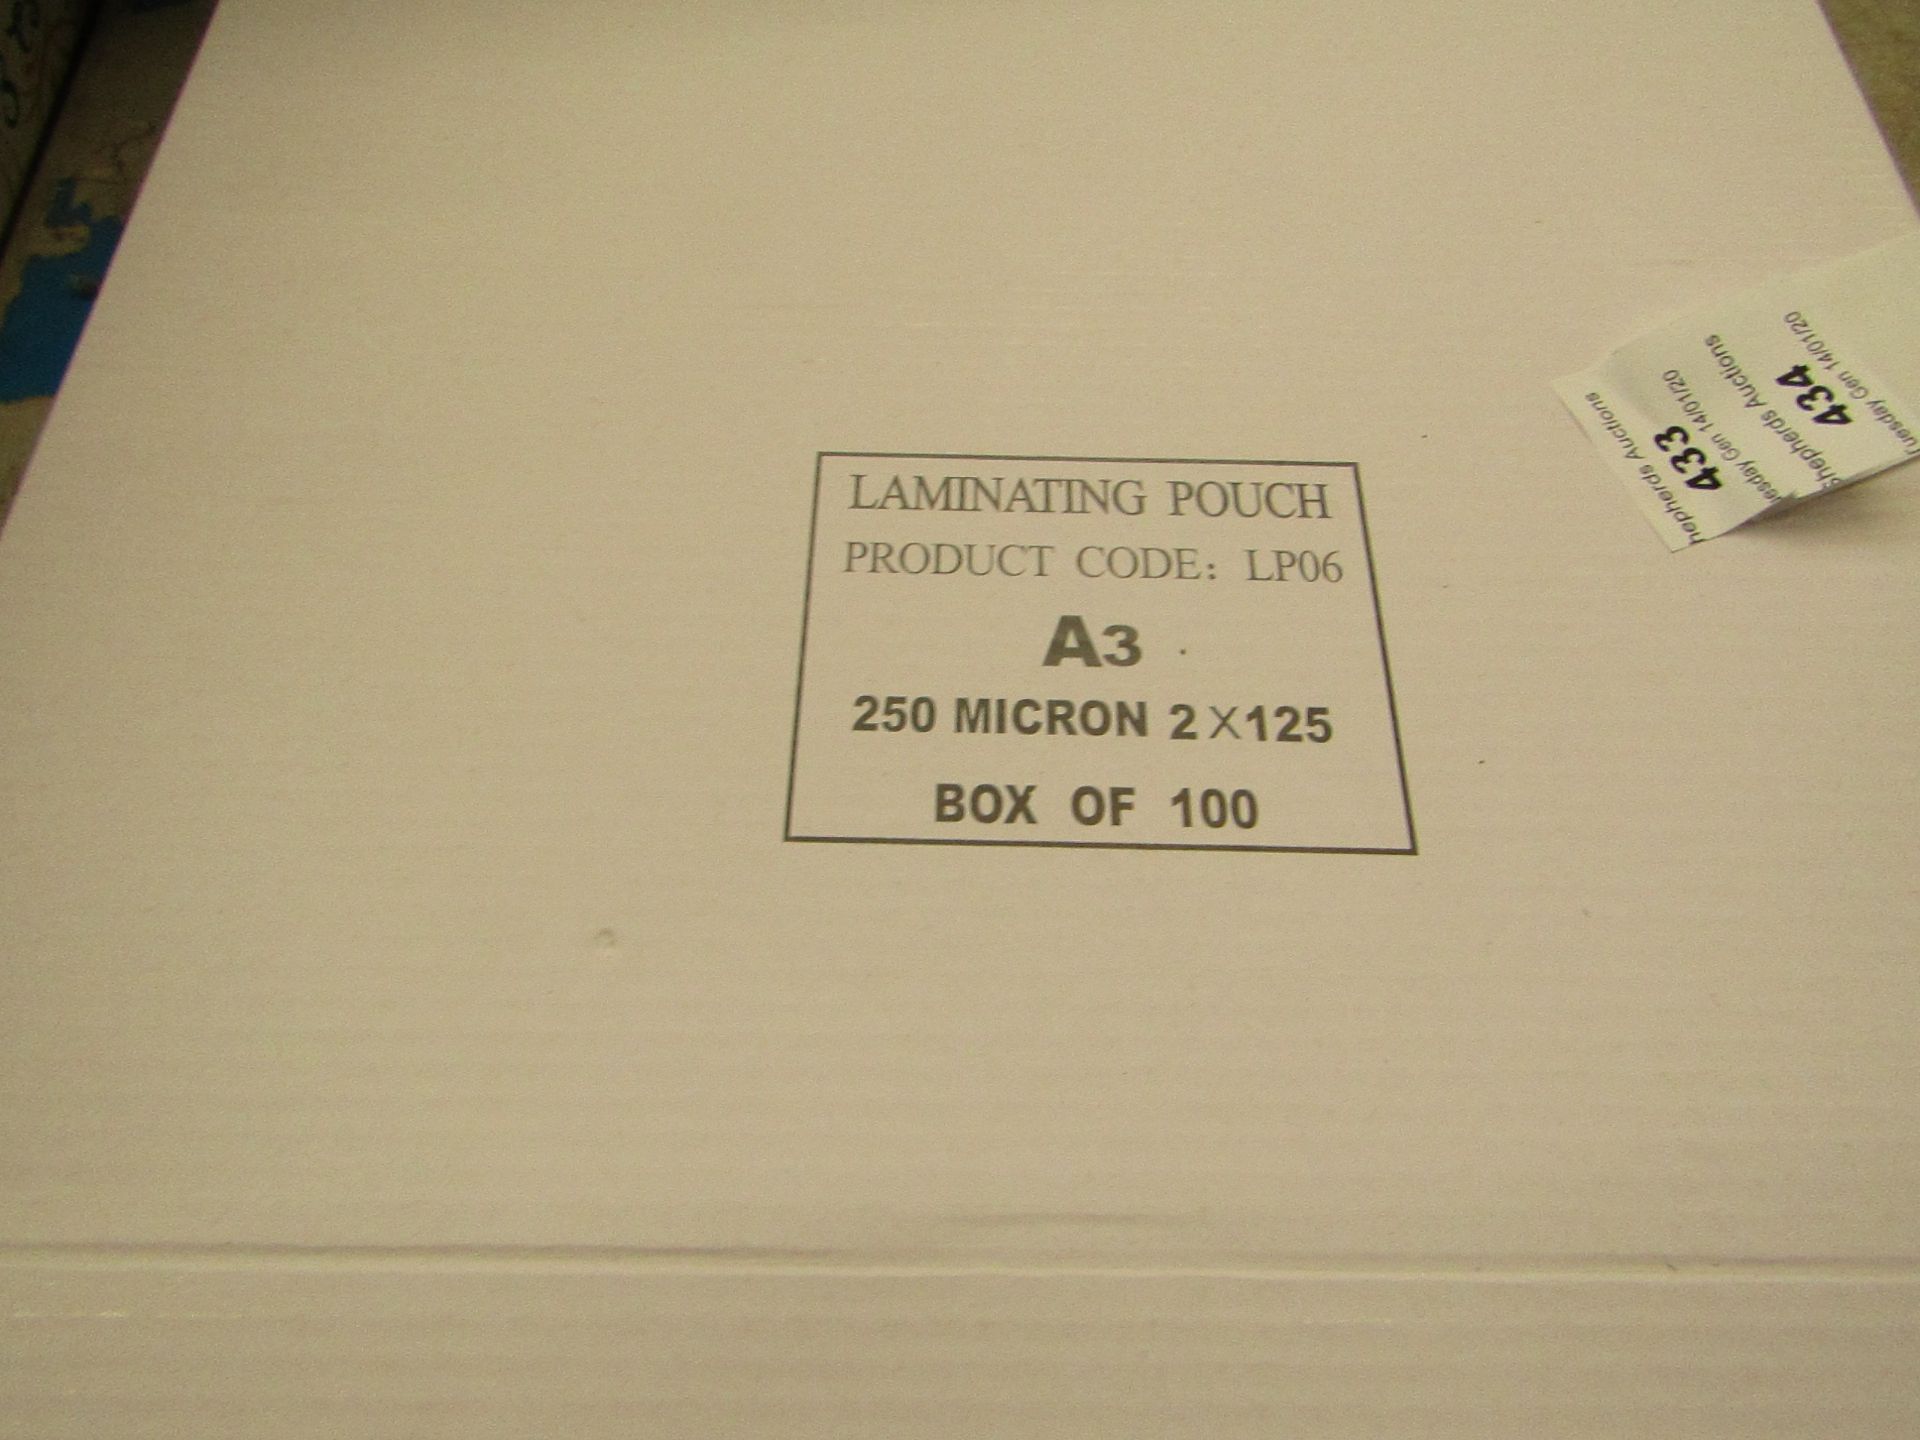 A box of 100 A3 Laminating pouches, new